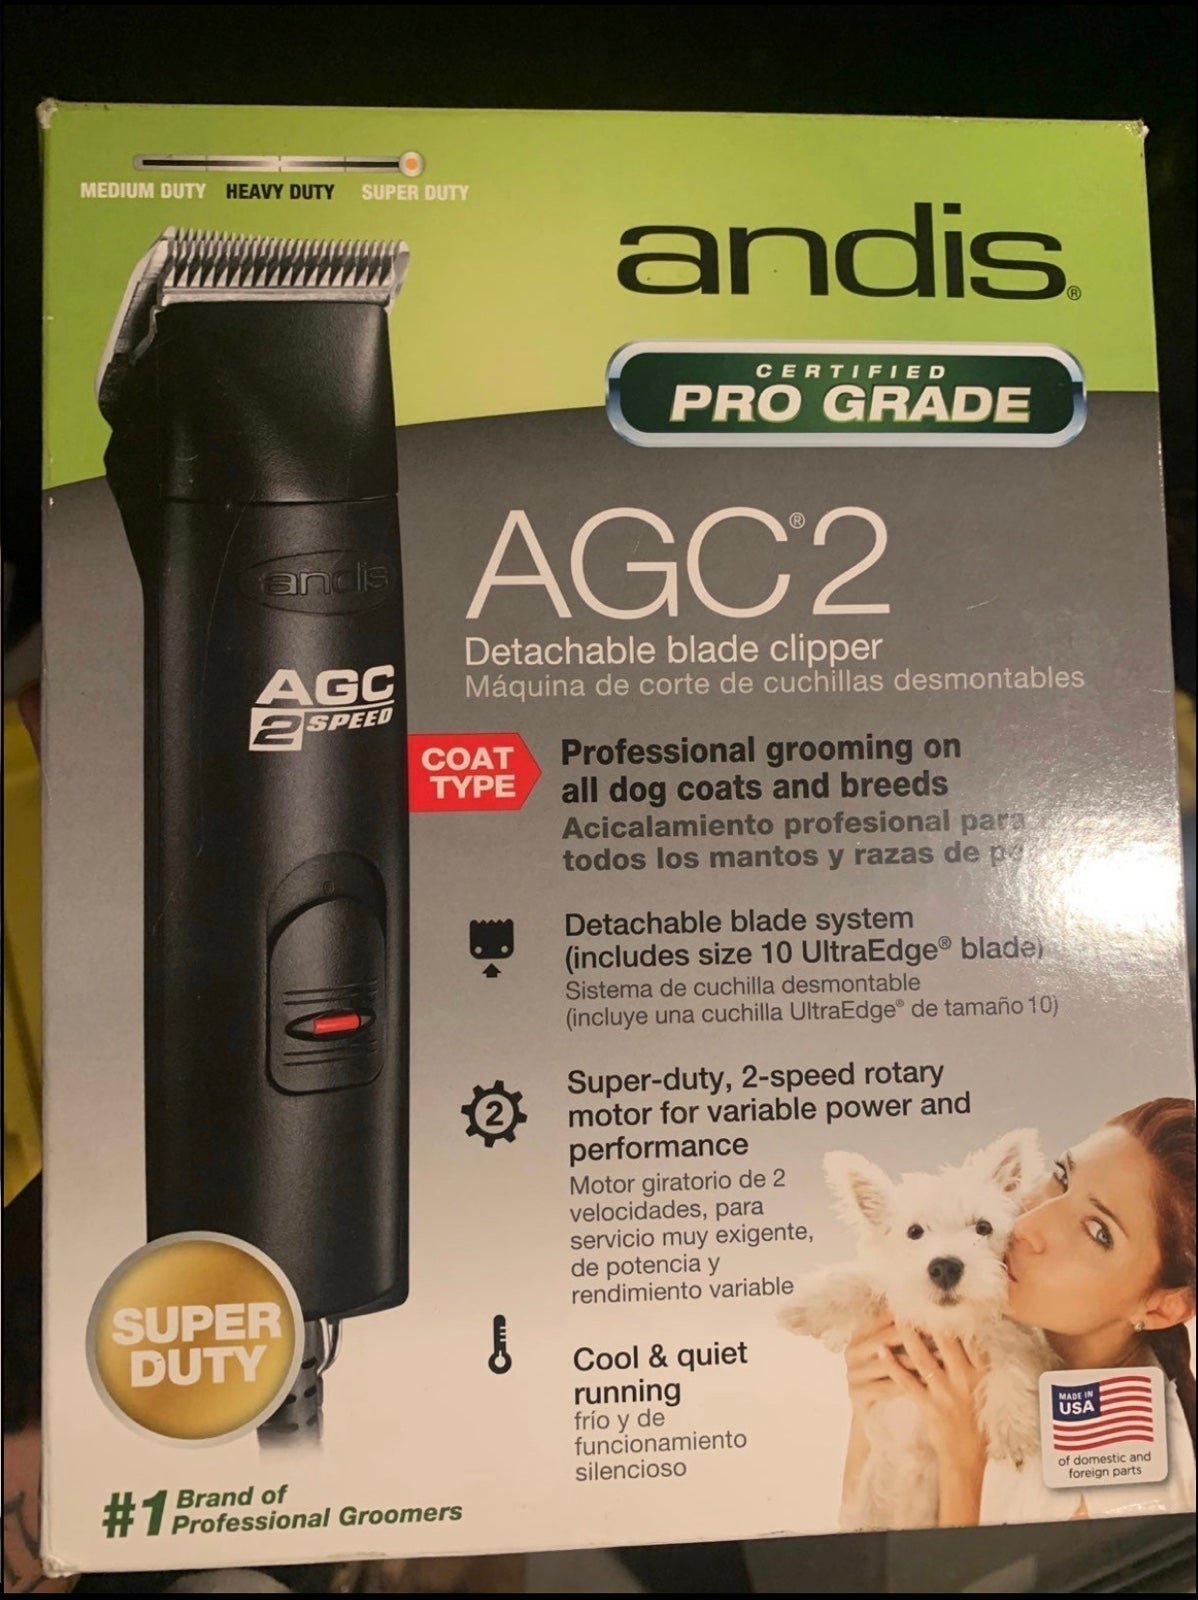 andis dog clippers C4MXiqW85